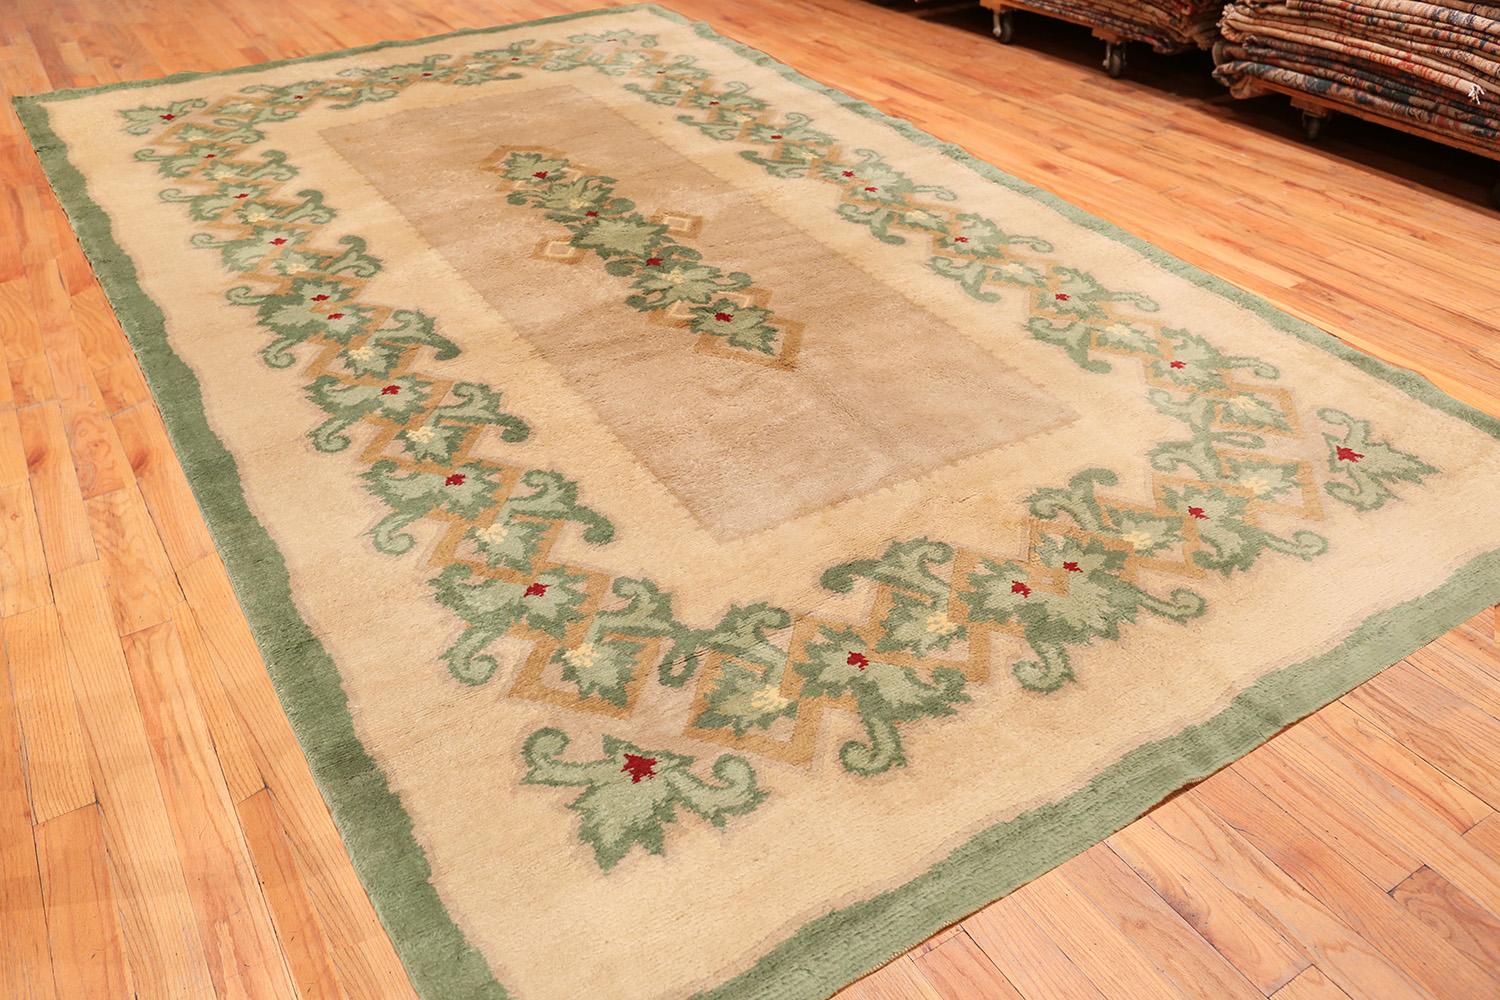 Magnificent and Luxurious Antique French Art Deco Rug Attributed to Leleu, Country of Origin / Rug Type: French Rug, Circa Date: 1920 . Size: 7 ft 10 in x 12 ft 10 in (2.39 m x 3.91 m)

Jules Leleu was a French furniture designer whose worked